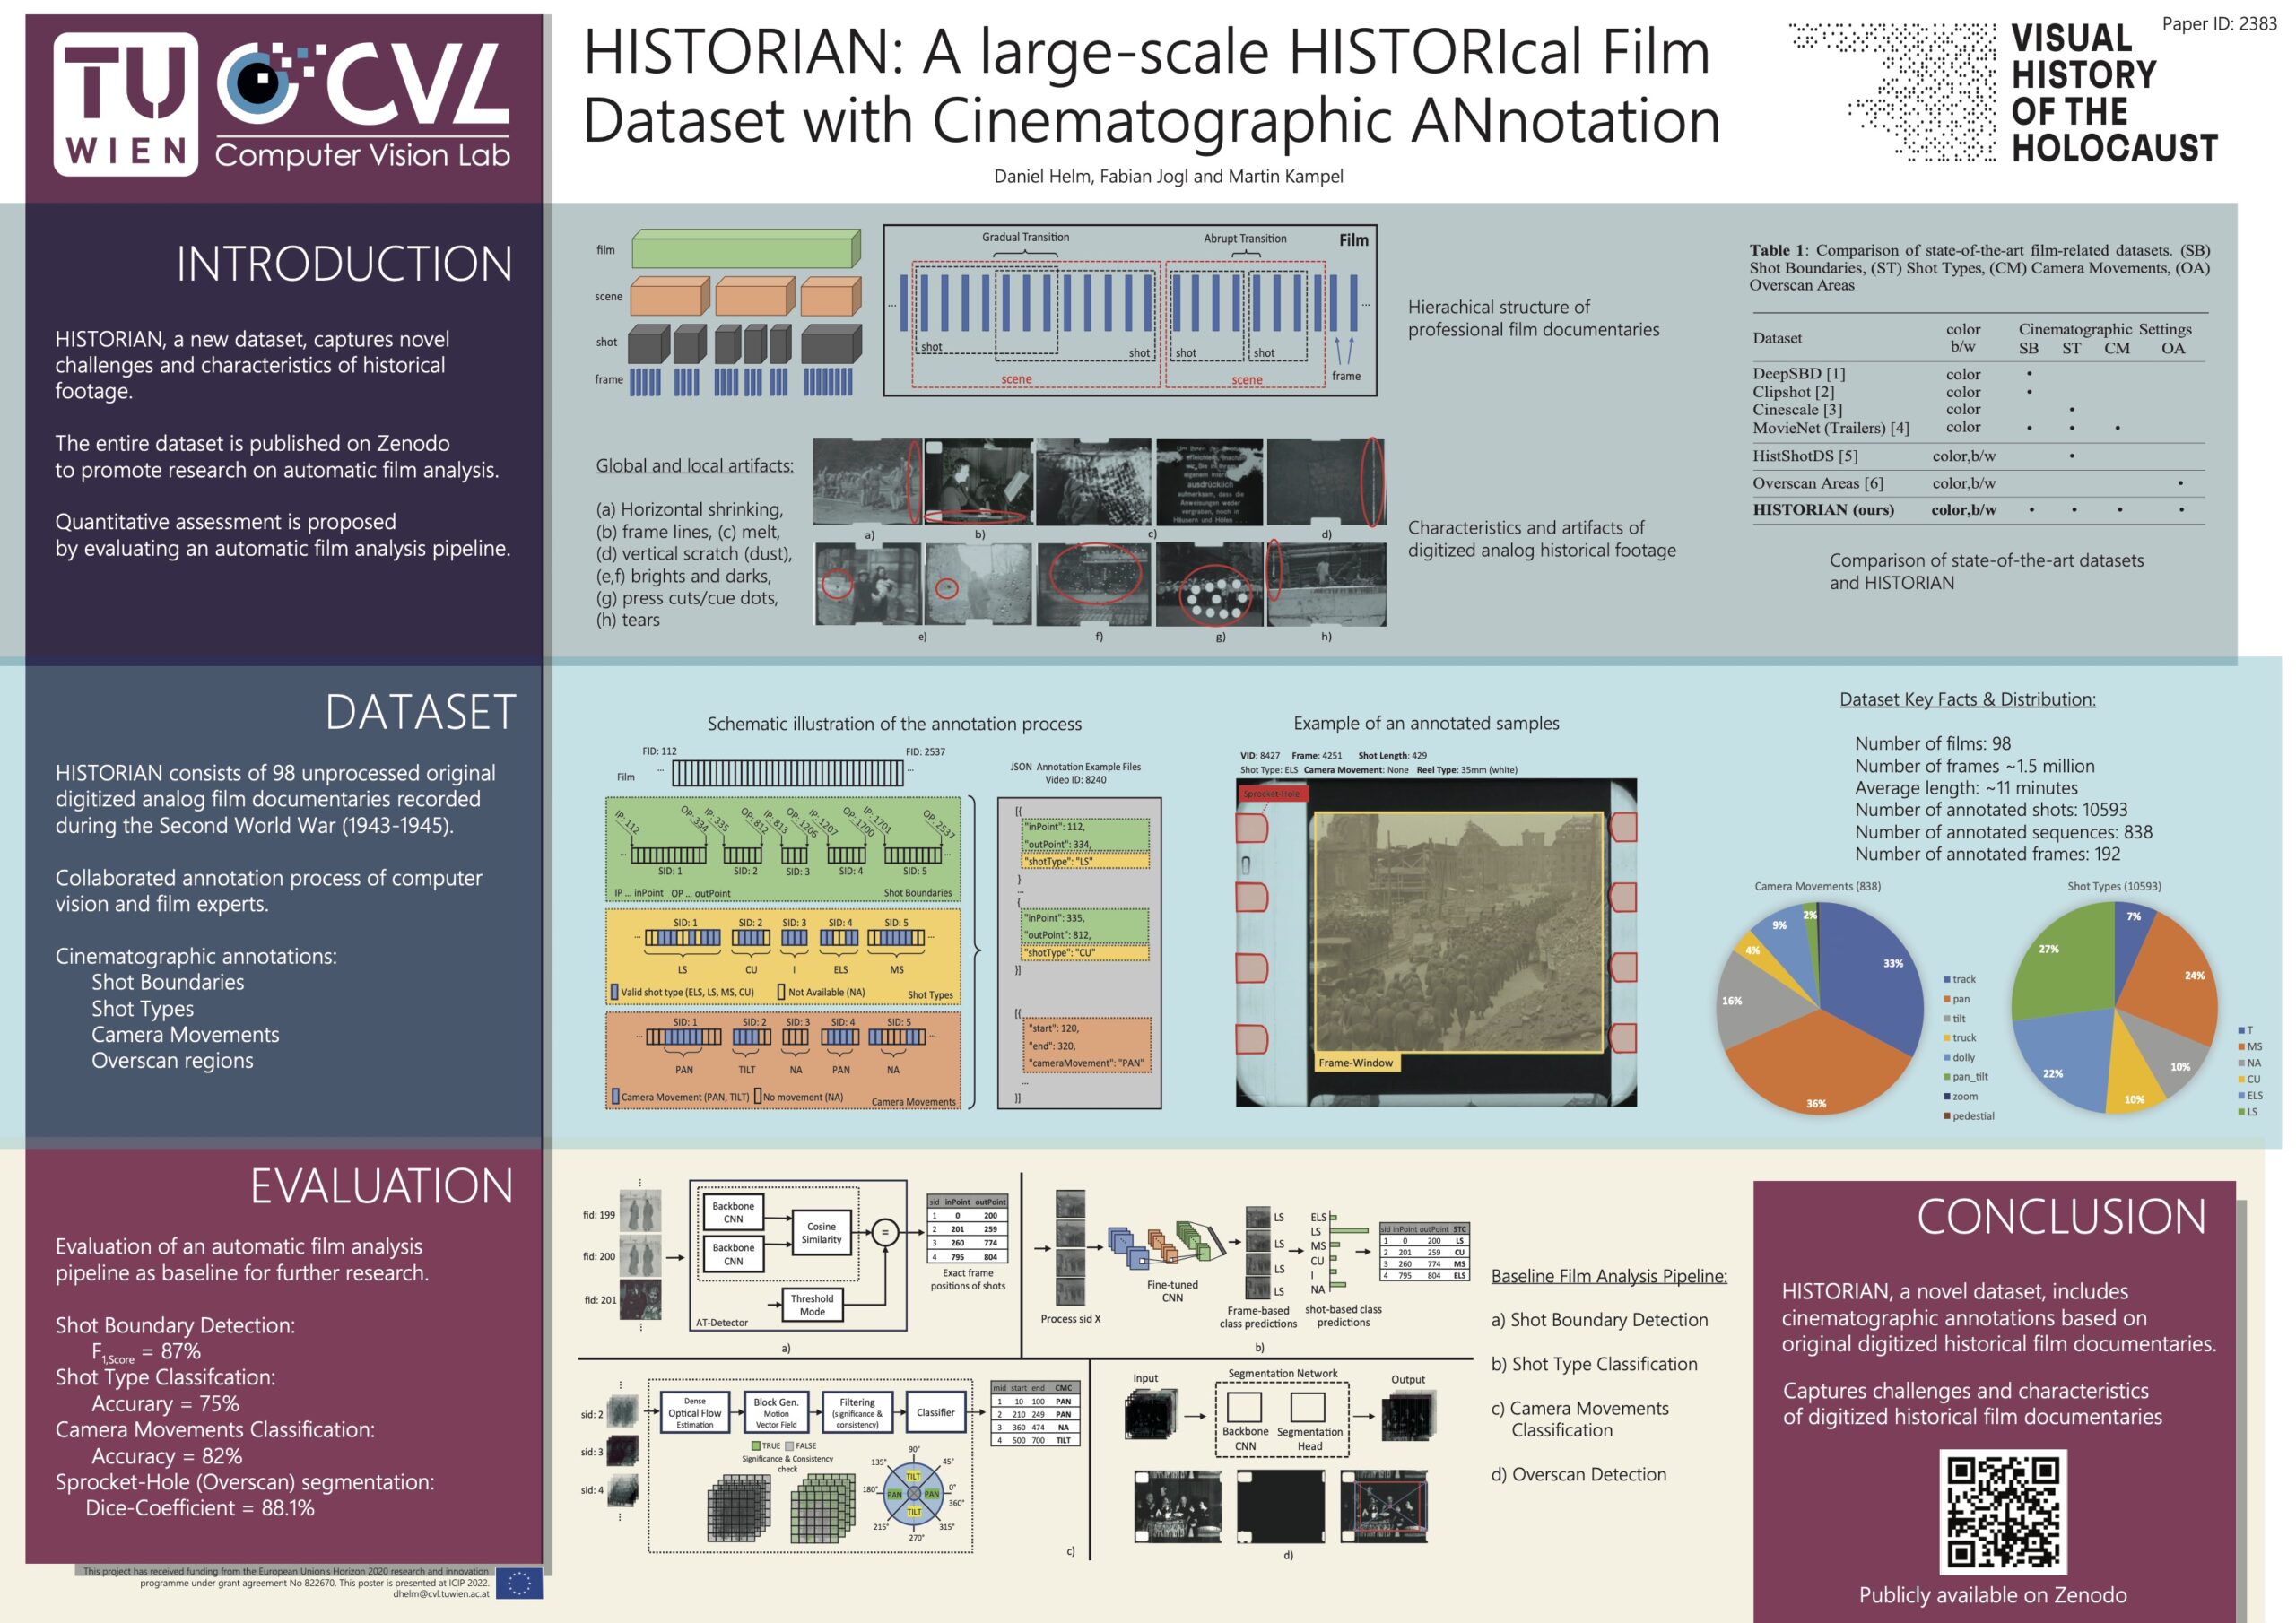 This event poster shows the presented poster with graphics, images and written text.